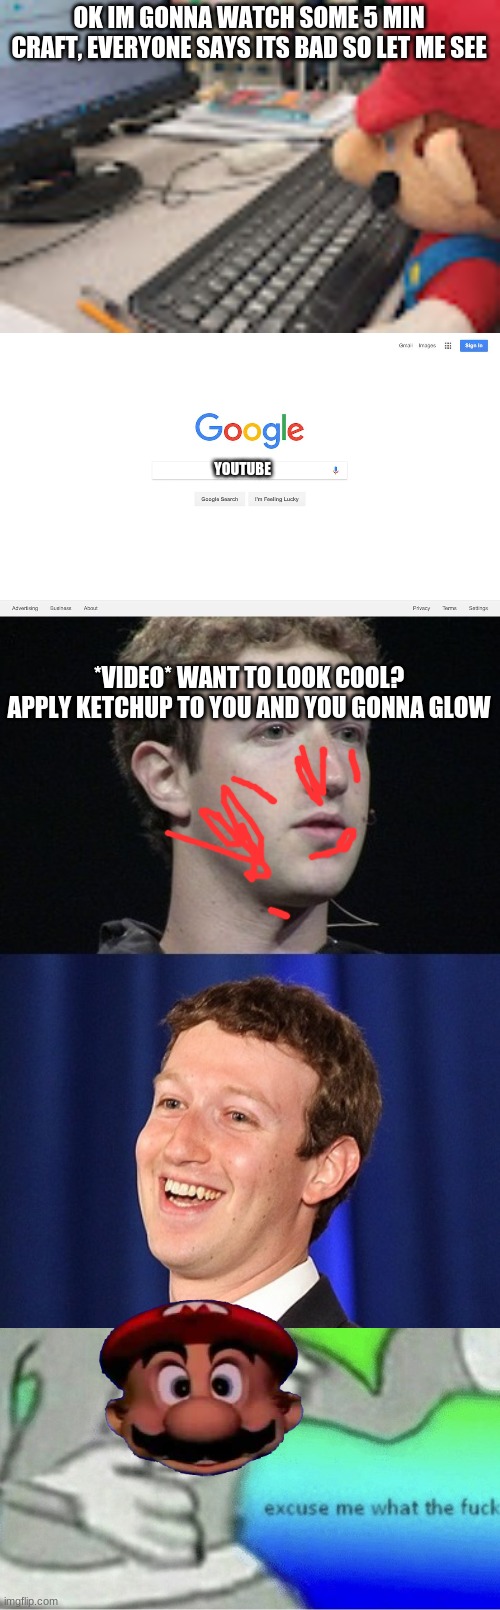 excuse me what |  OK IM GONNA WATCH SOME 5 MIN CRAFT, EVERYONE SAYS ITS BAD SO LET ME SEE; YOUTUBE; *VIDEO* WANT TO LOOK COOL? APPLY KETCHUP TO YOU AND YOU GONNA GLOW | image tagged in mario on computer,google search meme,memes,zuckerberg,excuse me wtf blank template | made w/ Imgflip meme maker